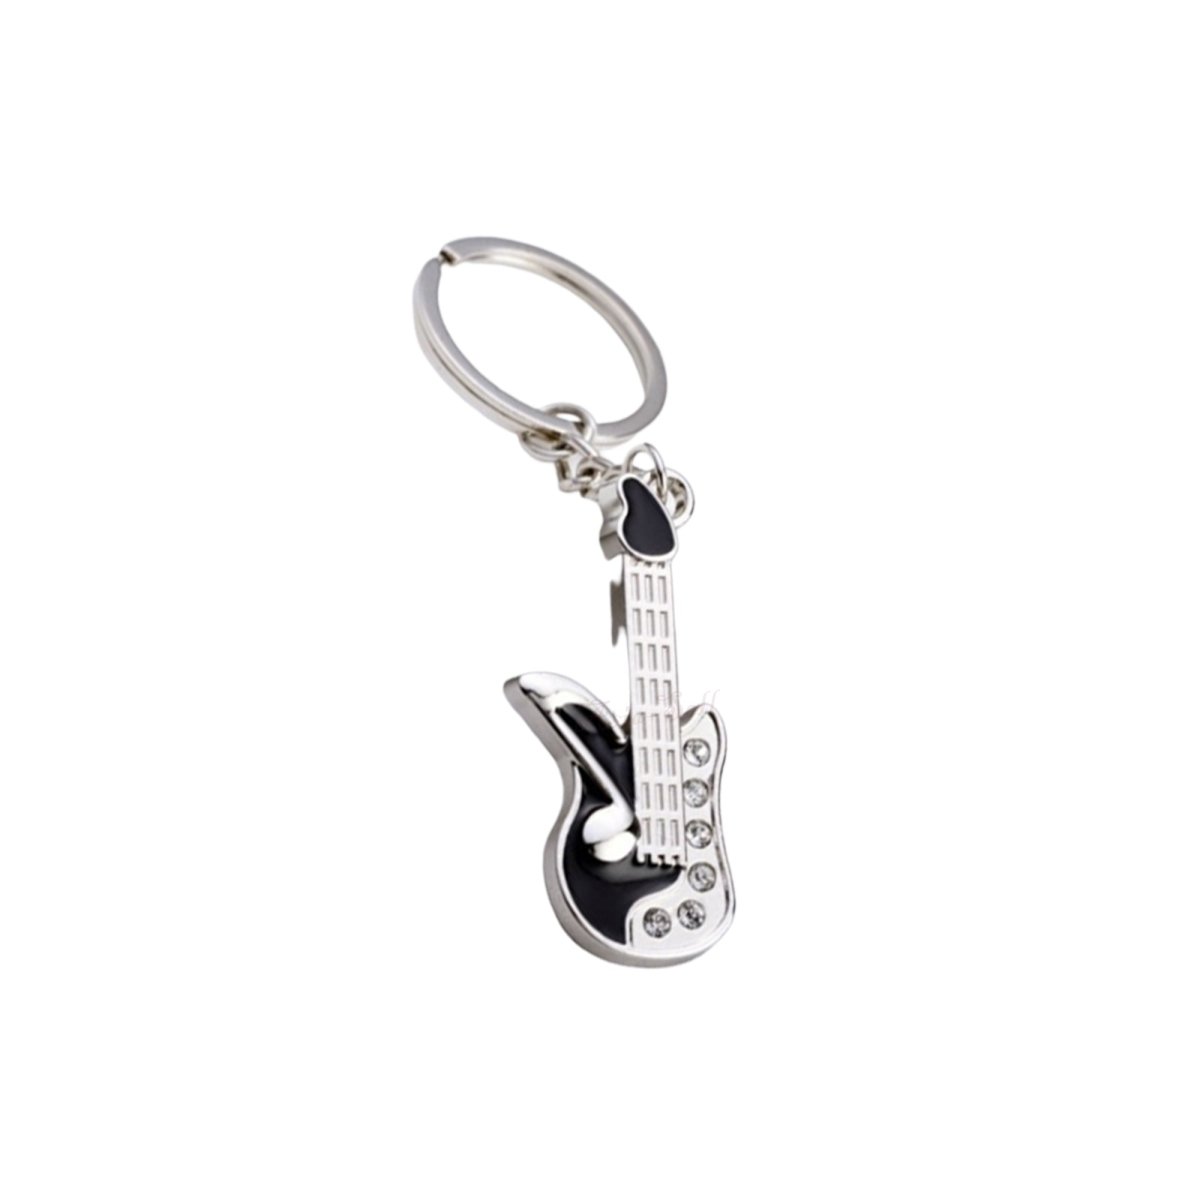 30mm Keyring Guitar Keychain 7.5cm Key Ring Key Chain Bag Accessory Holder Pendant Tag - Black White With Gems - - Asia Sell